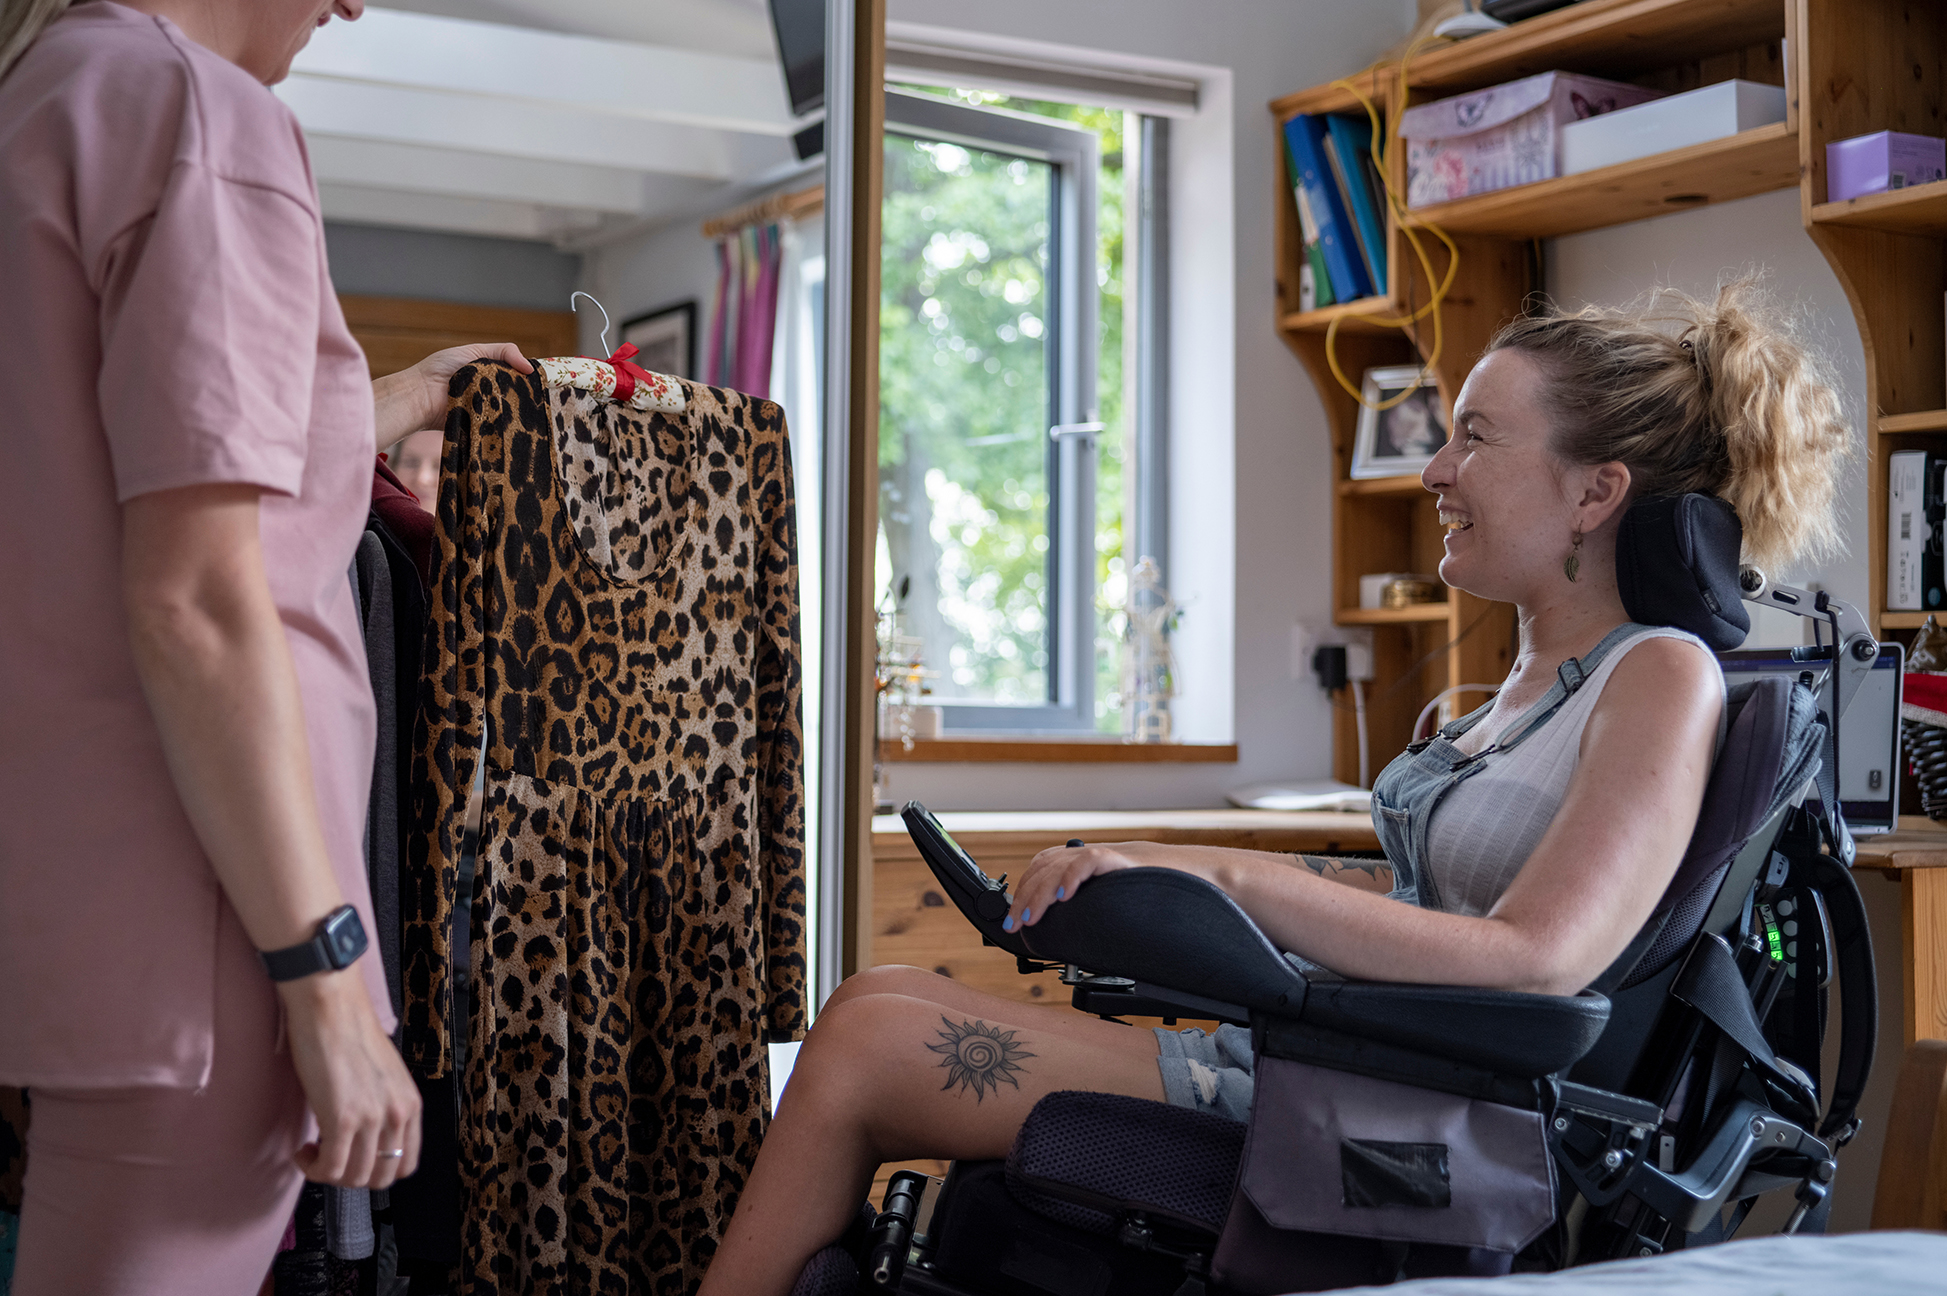 "A woman holds up an outfit to a woman sitting in a motorized wheelchair who is smiling"